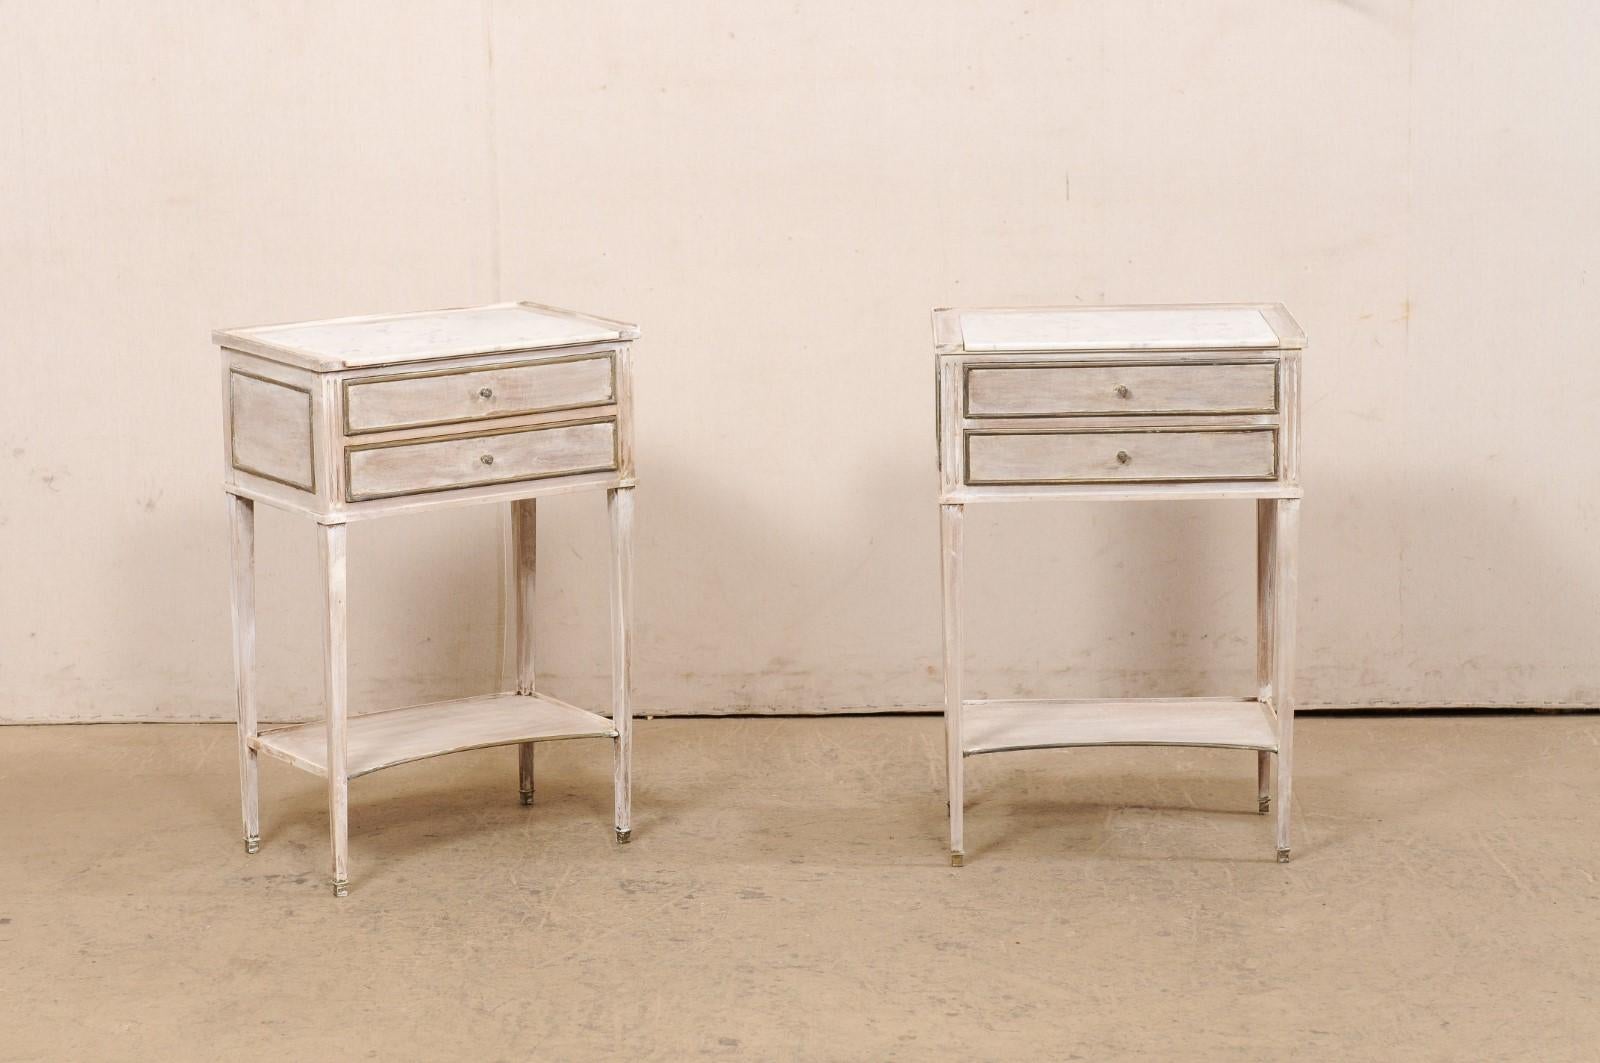 A French pair of painted wood side chests, with marble tops and brass accents, from the mid 20th century. These mid-century commodes from France each feature a rectangular-shaped with fixed/recessed white marble, surrounded with a raised lip on